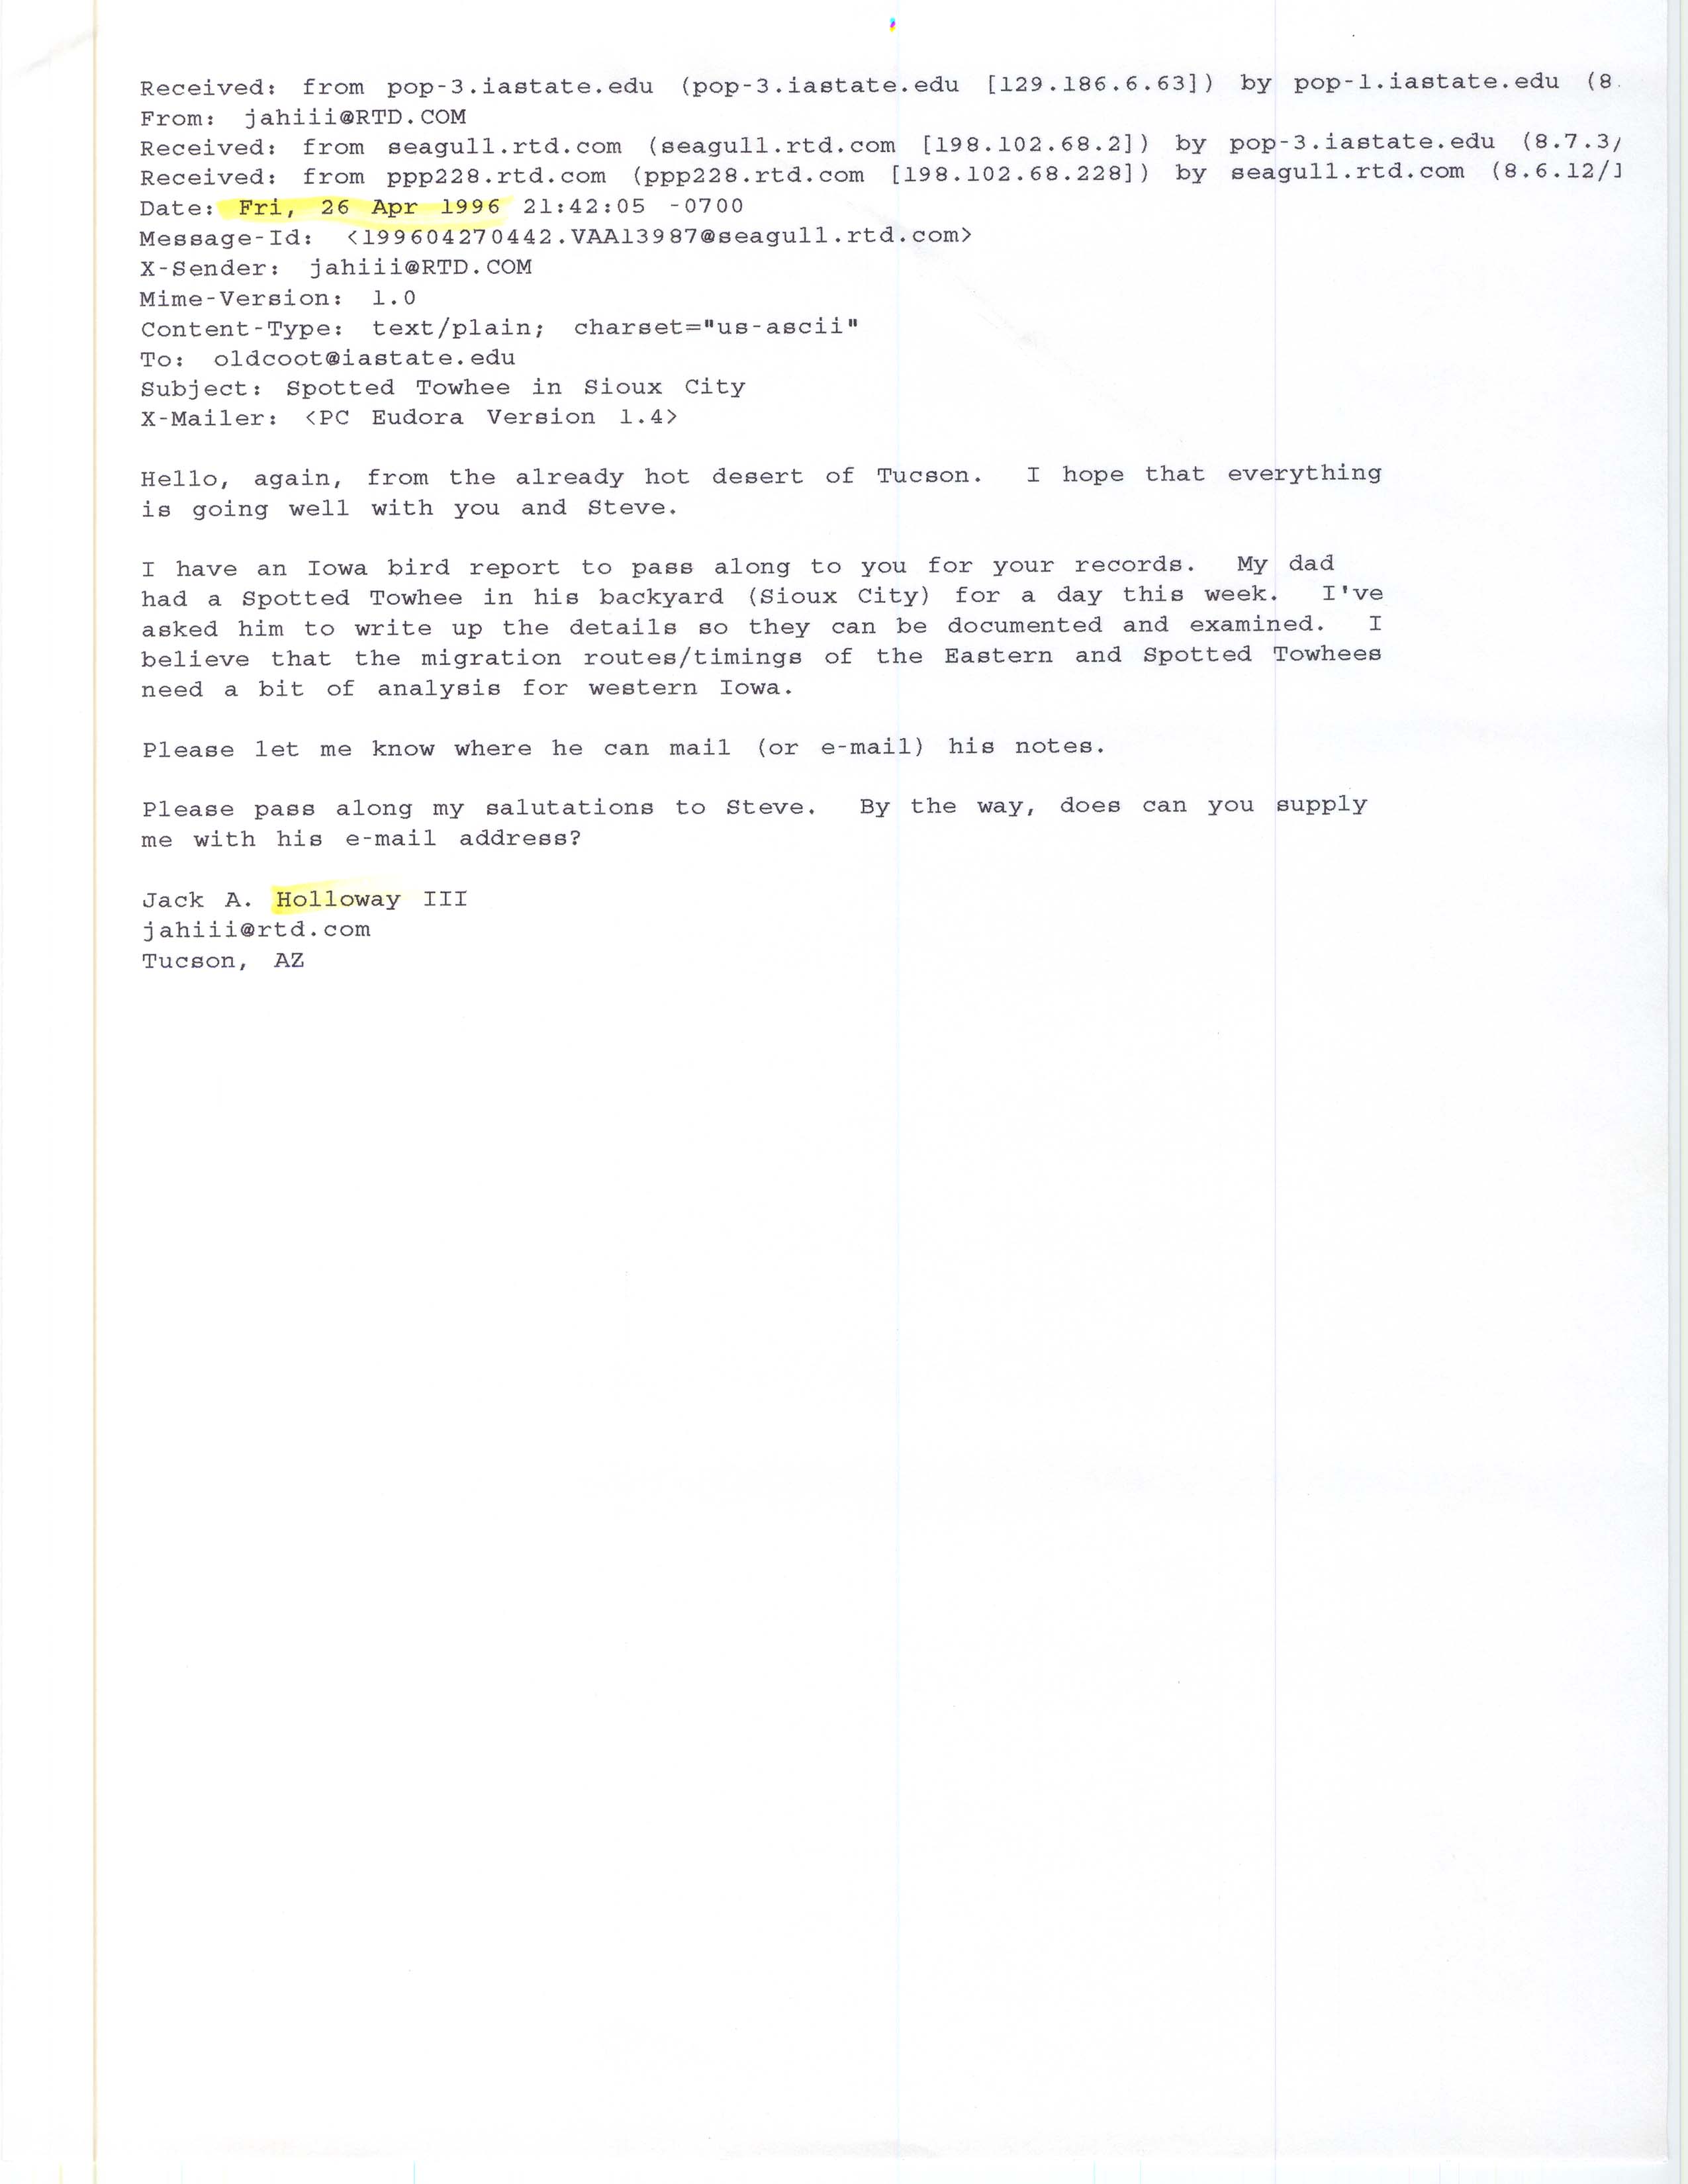 Jack A. Holloway III email to James J. Dinsmore regarding a Spotted Towhee sighting, April 26, 1996